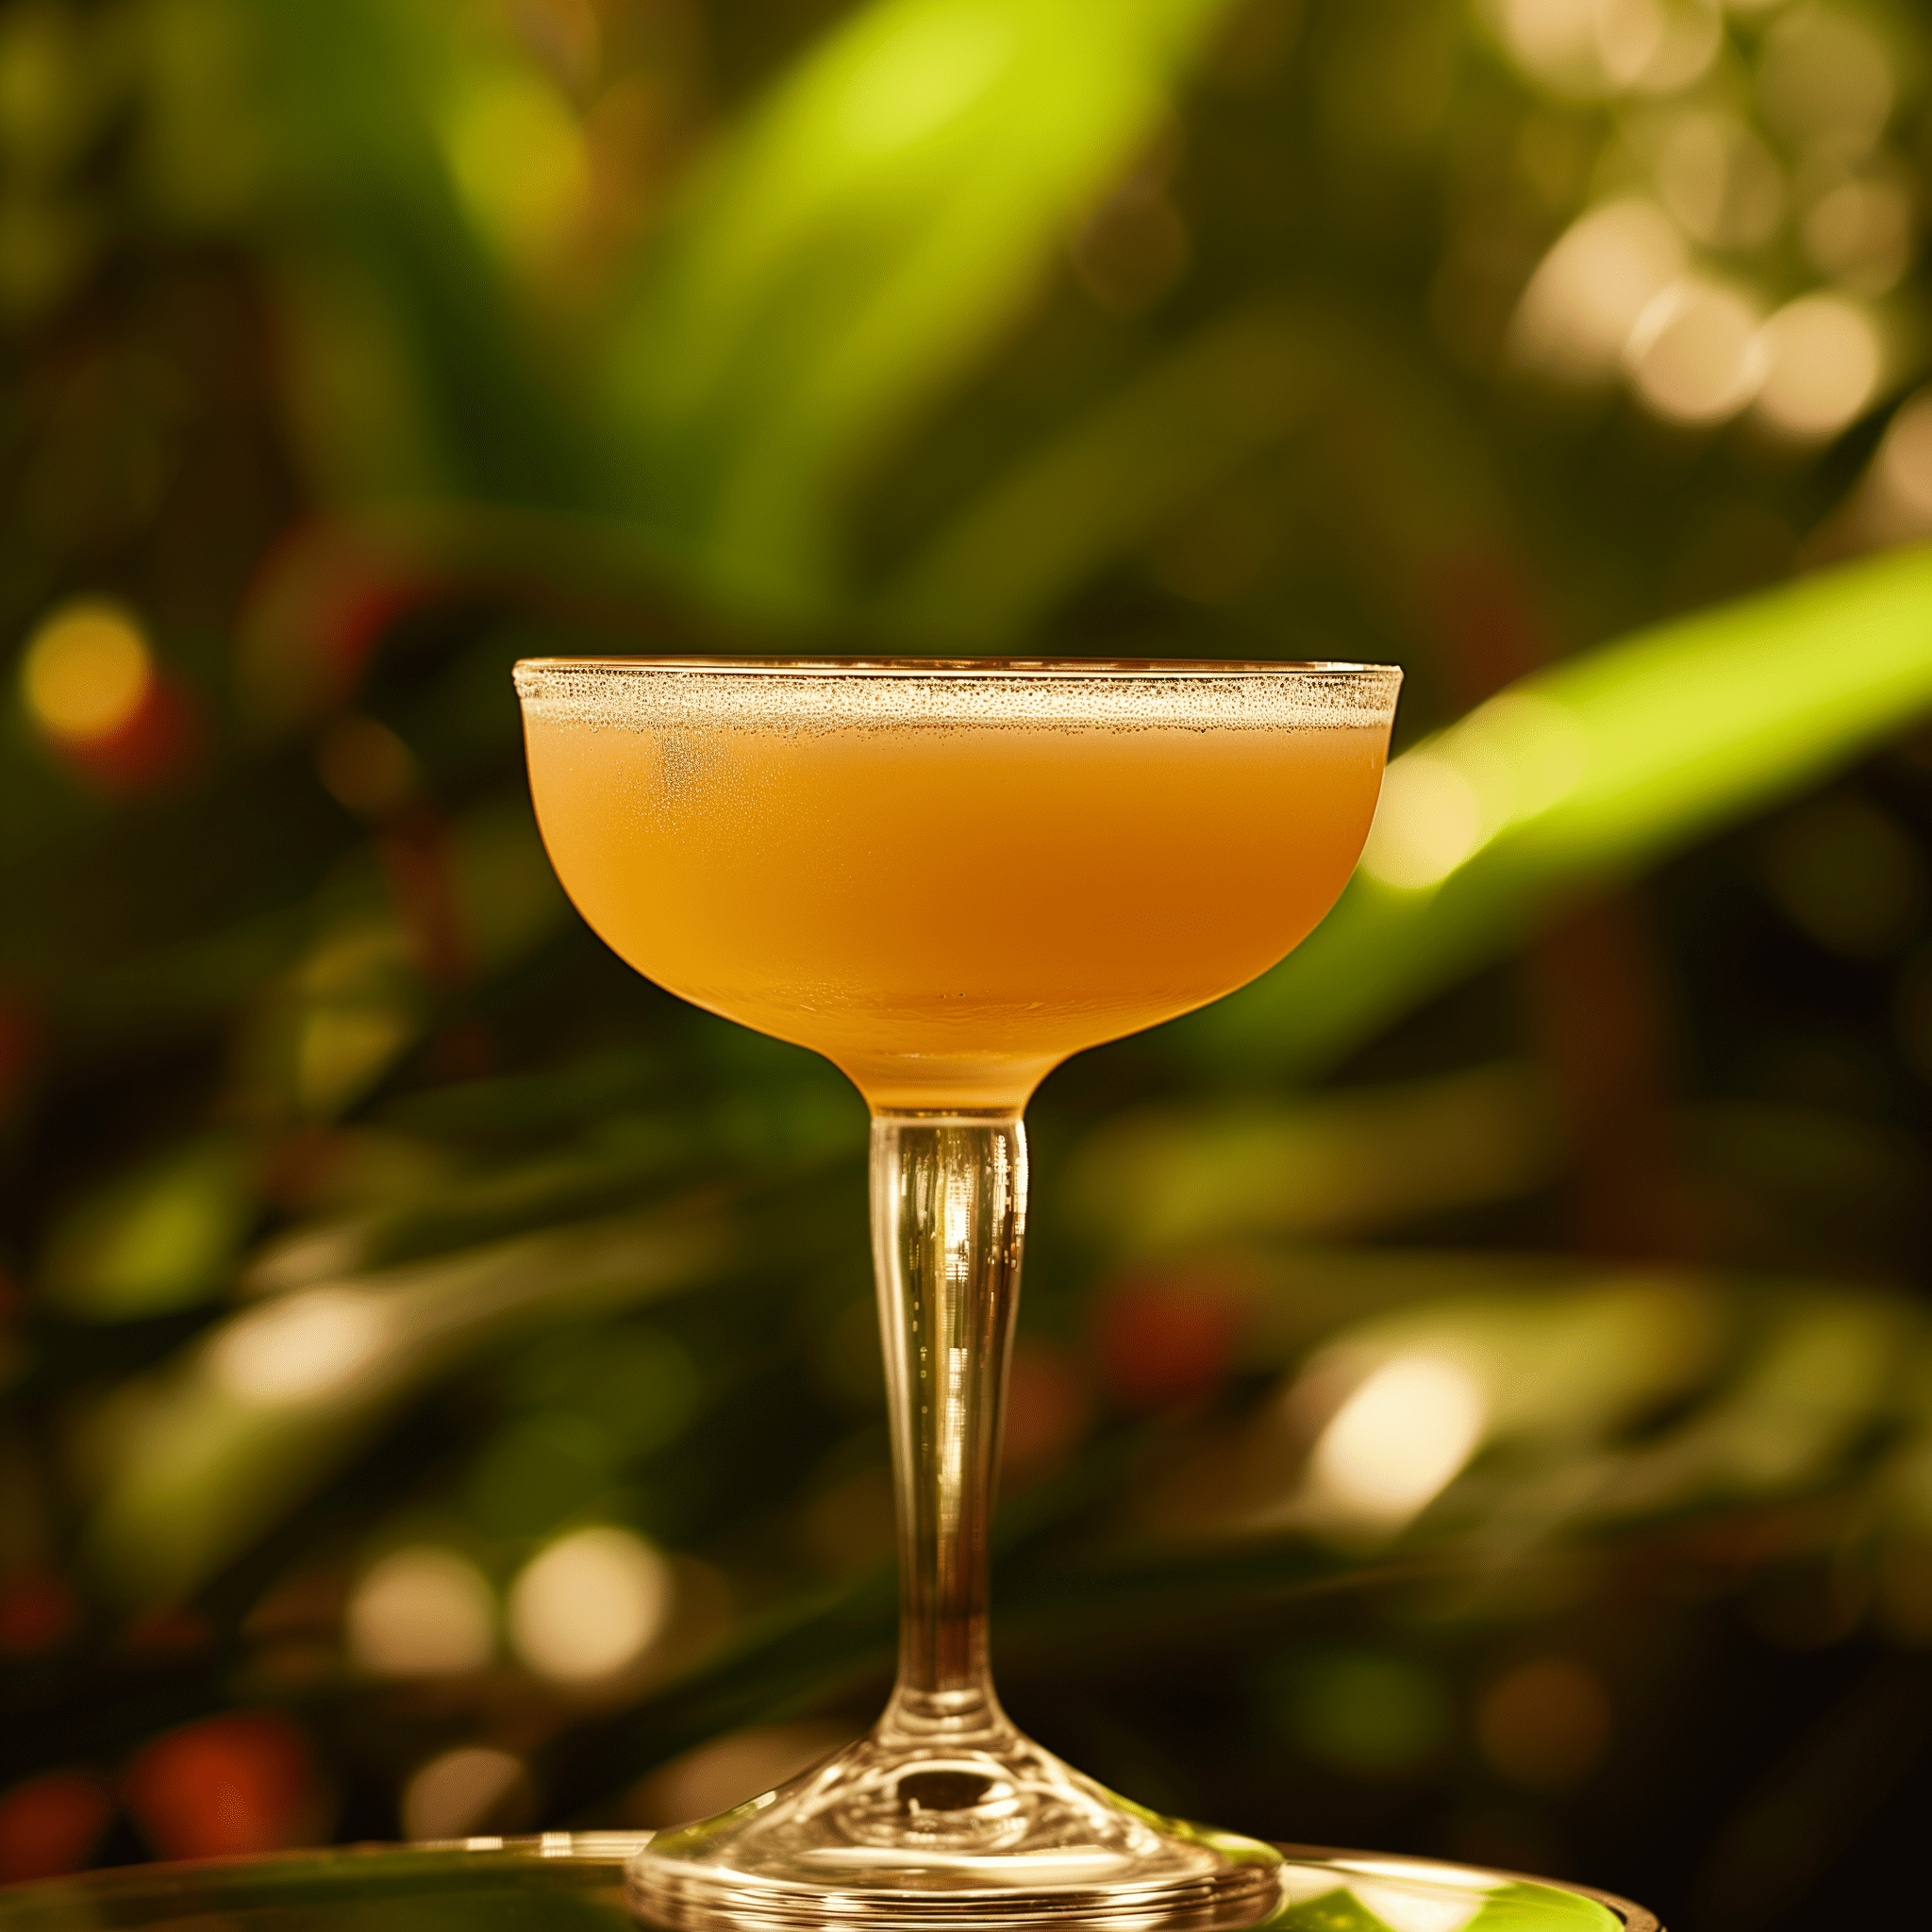 Honi Honi Cocktail Recipe - The Honi Honi cocktail offers a delightful balance of sweet and tart flavors. The apricot brandy brings a fruity sweetness that complements the rich, warm notes of the dark Jamaican rum. The lemon juice adds a zesty tang, cutting through the sweetness and giving the drink a refreshing sharpness.